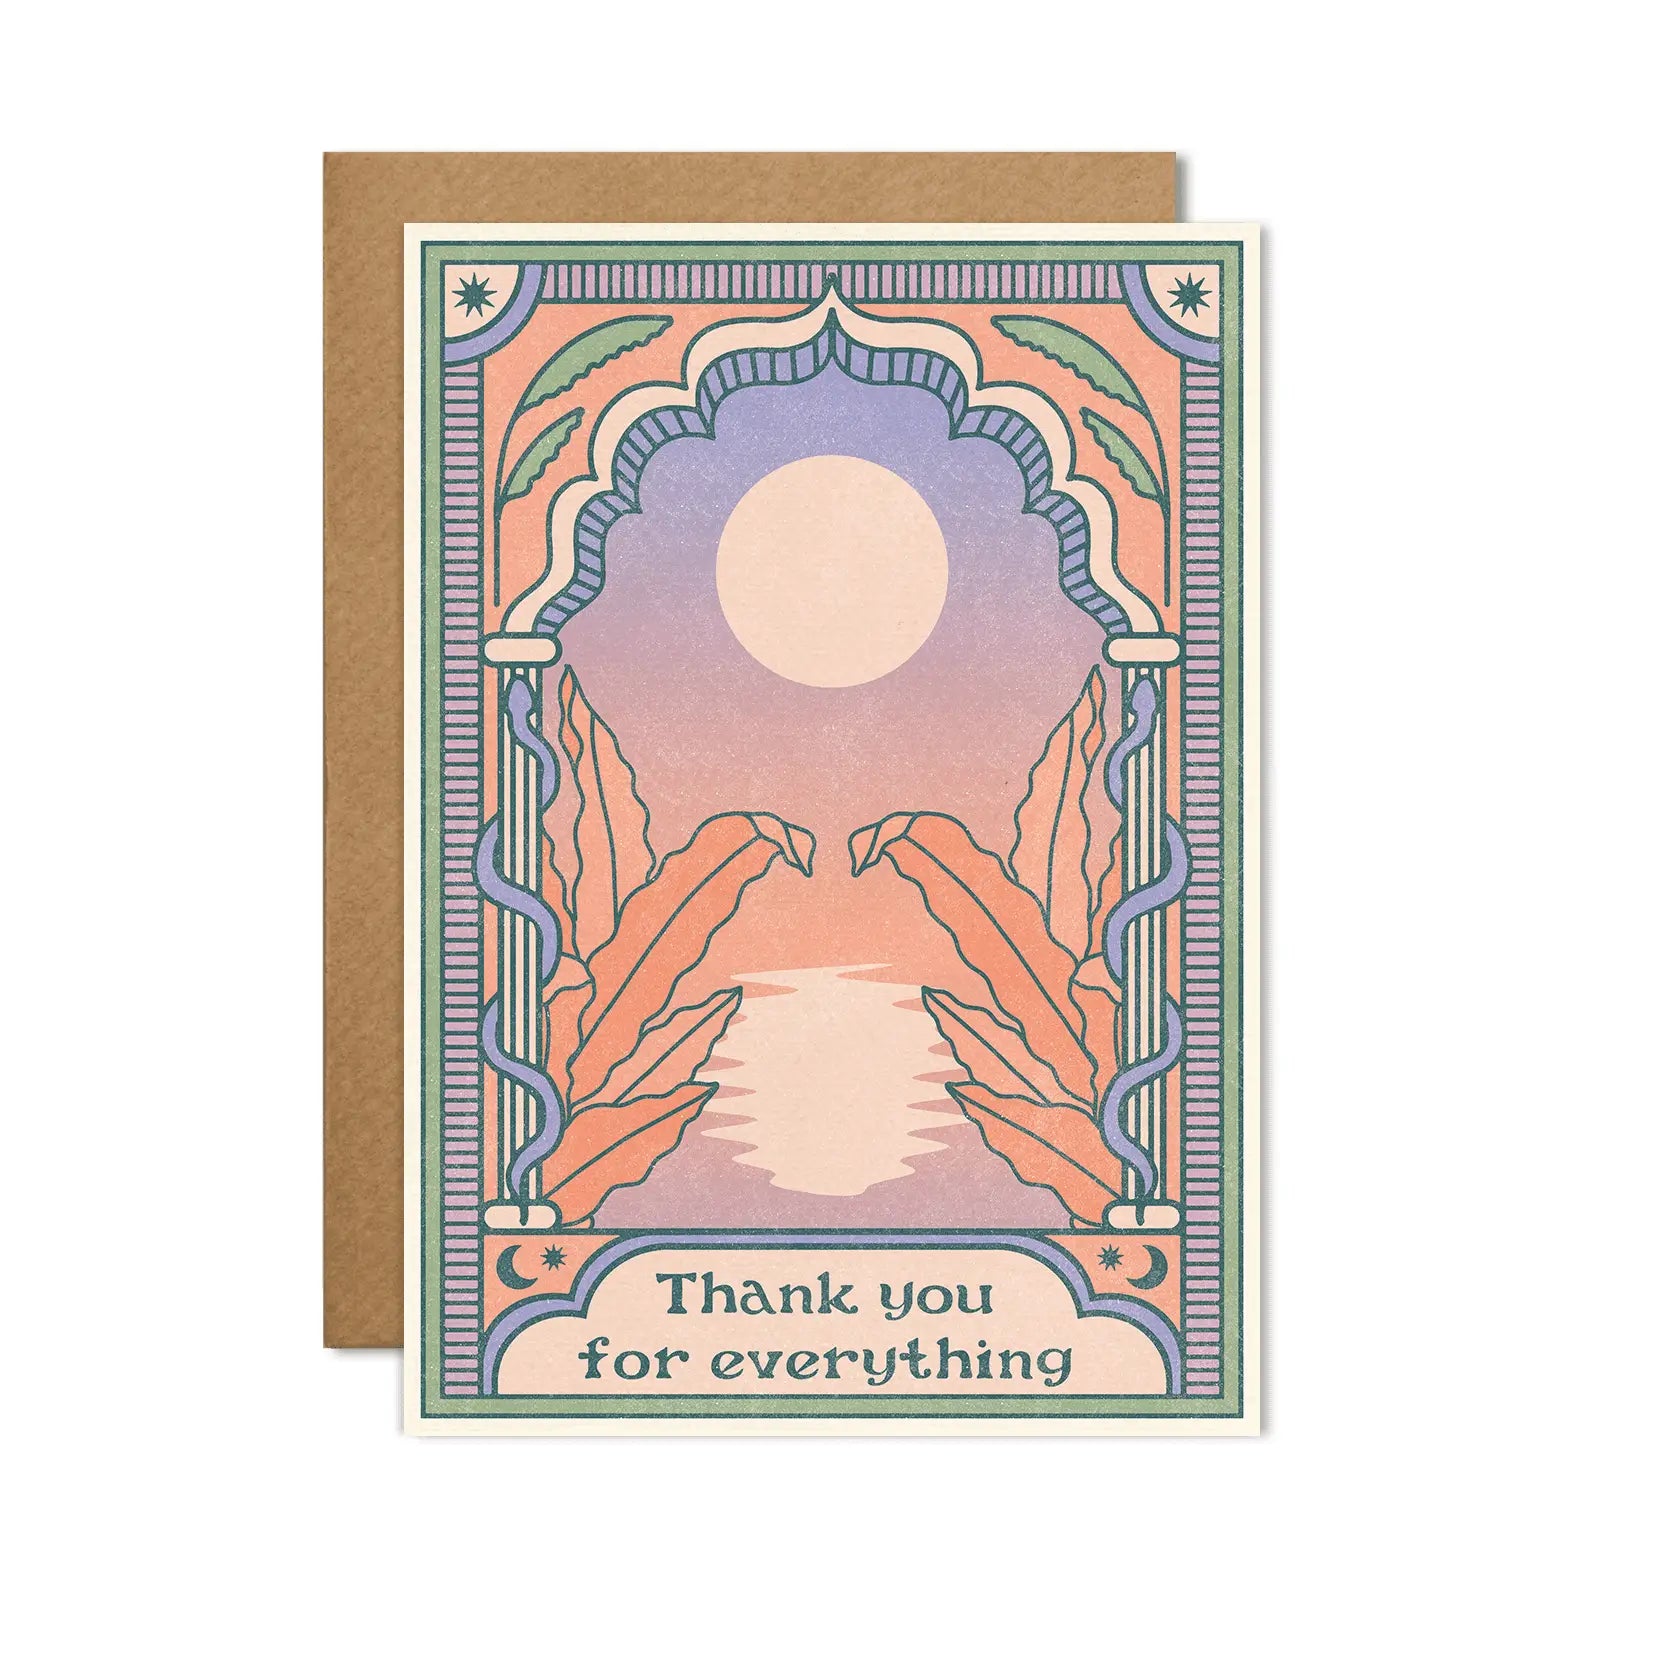 Cai & Jo “Thank You for Everything” Card